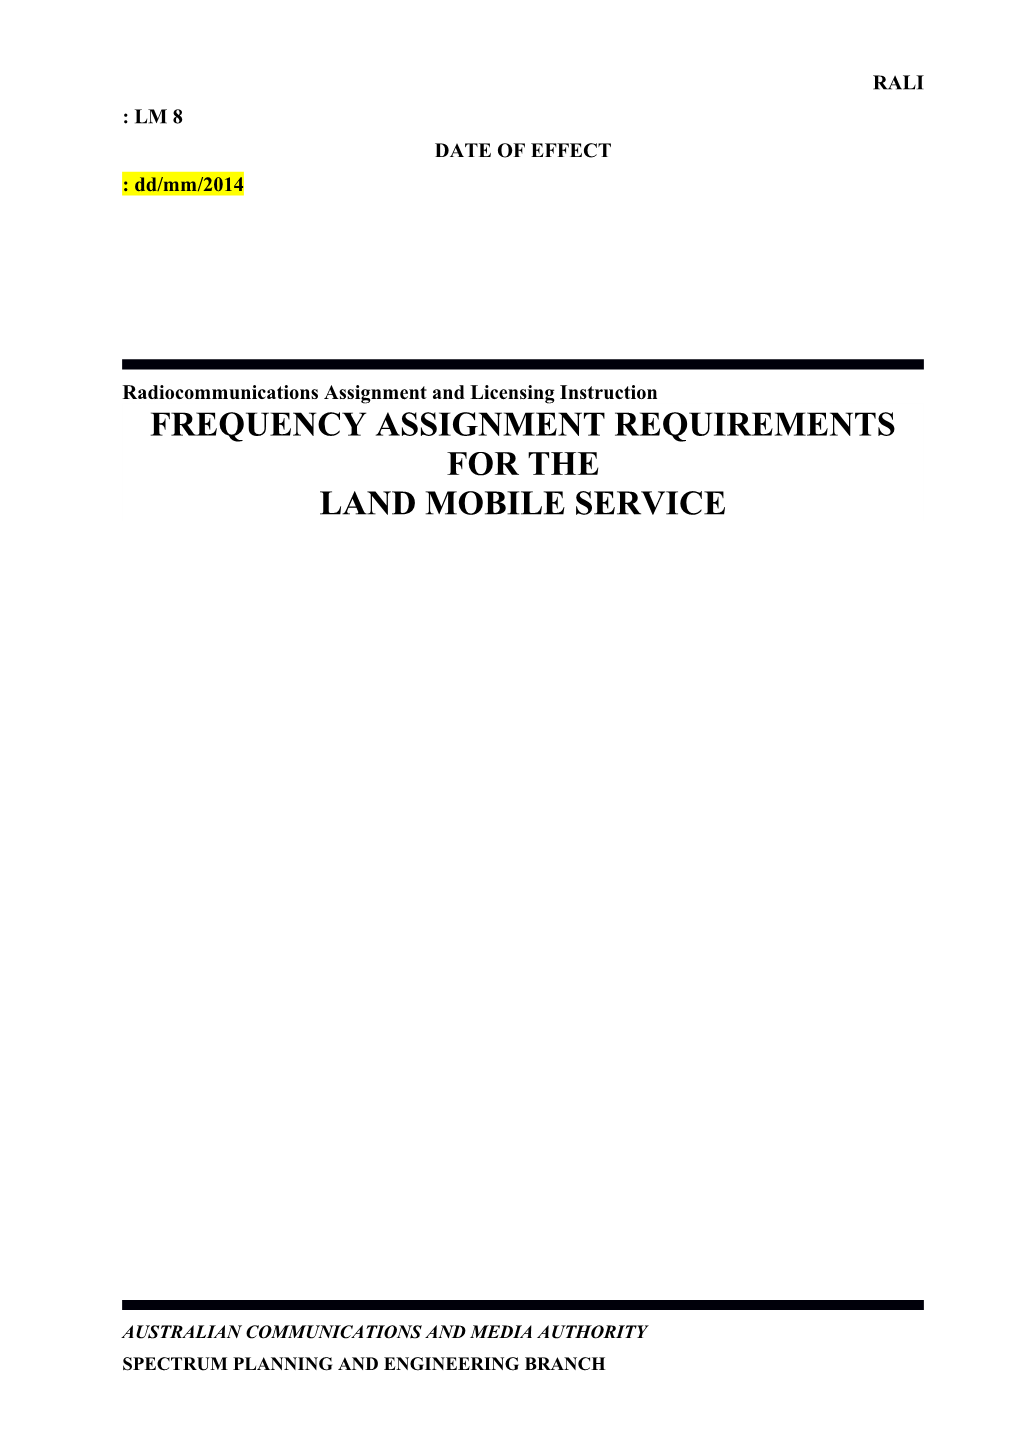 Frequency Assignment Guidelines for Land Mobile Services